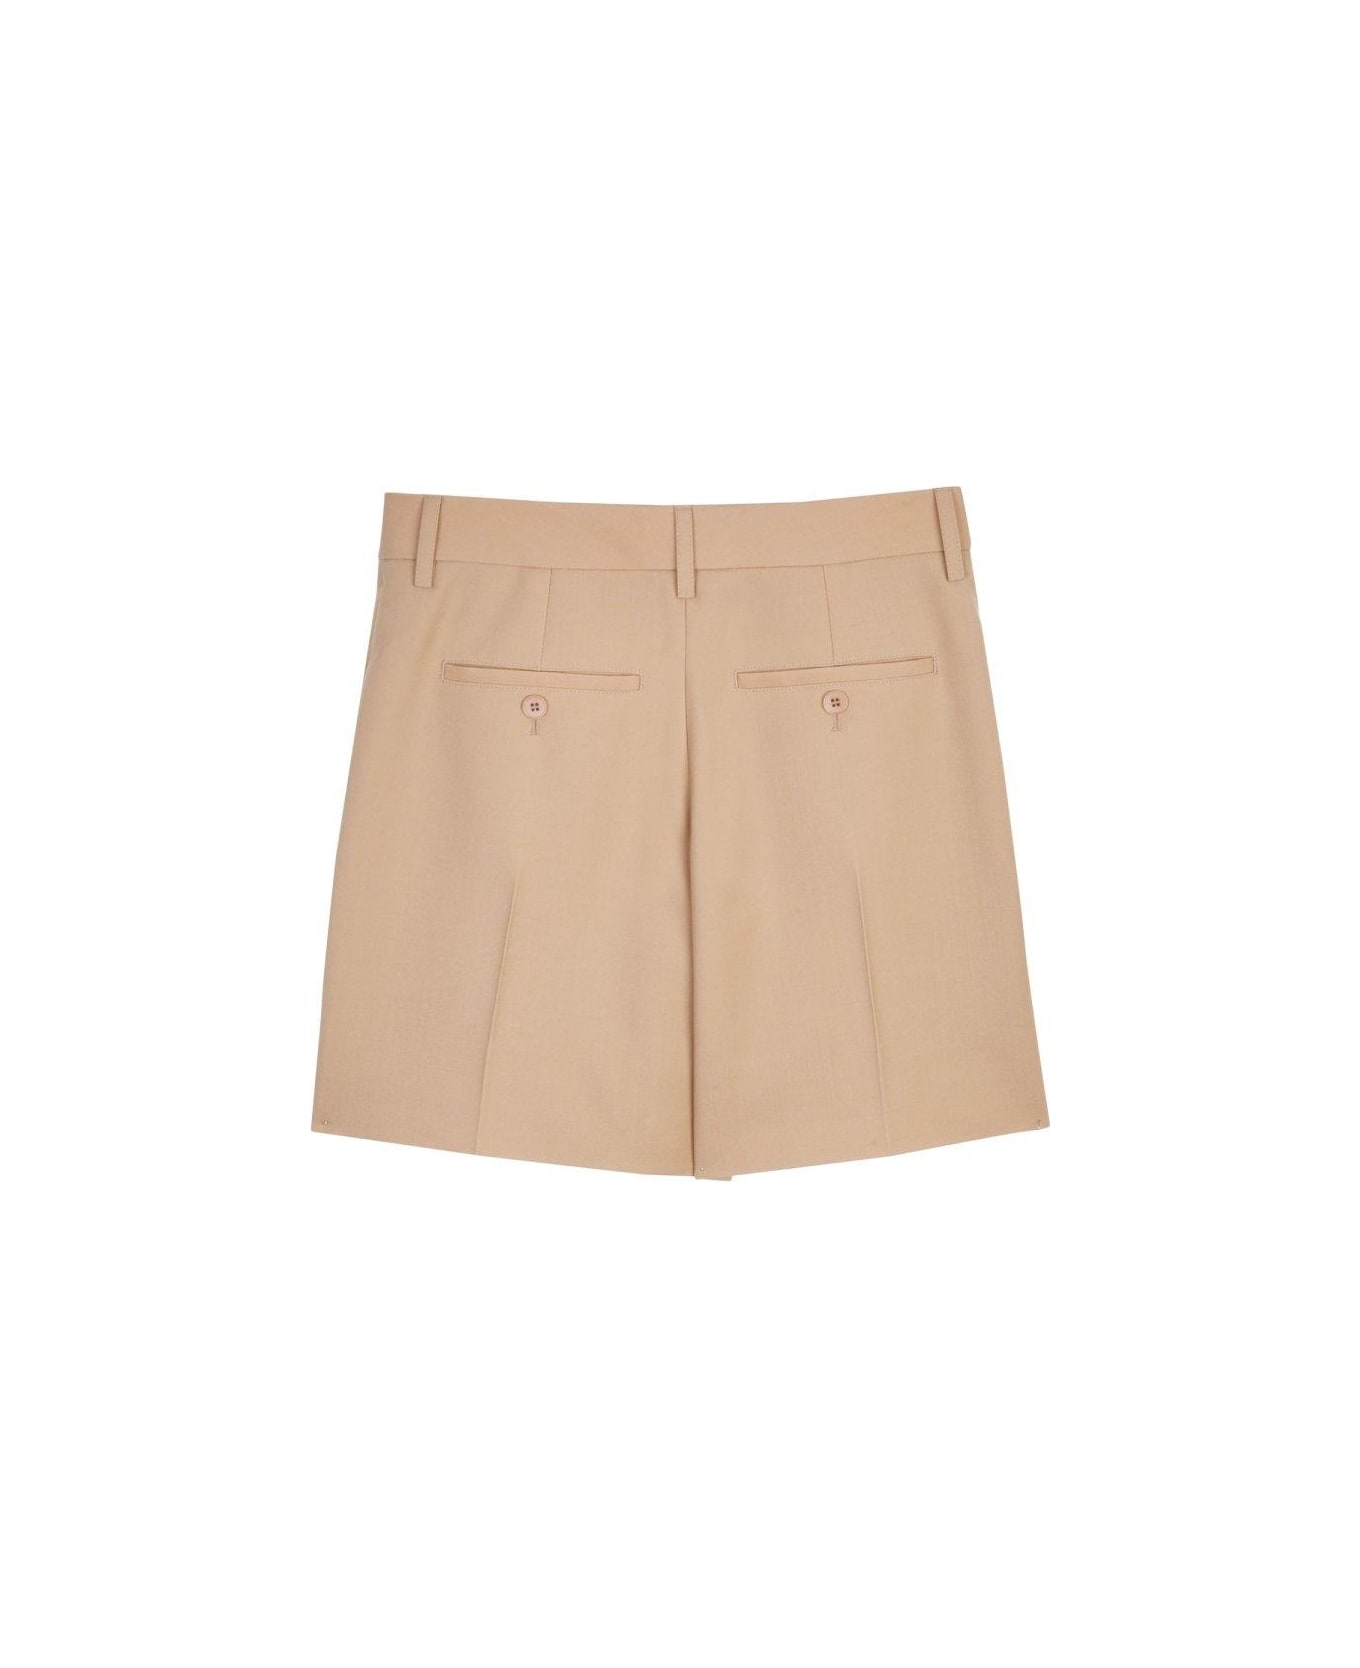 Burberry Logo Detailed Pleated Shorts - BROWN ショートパンツ